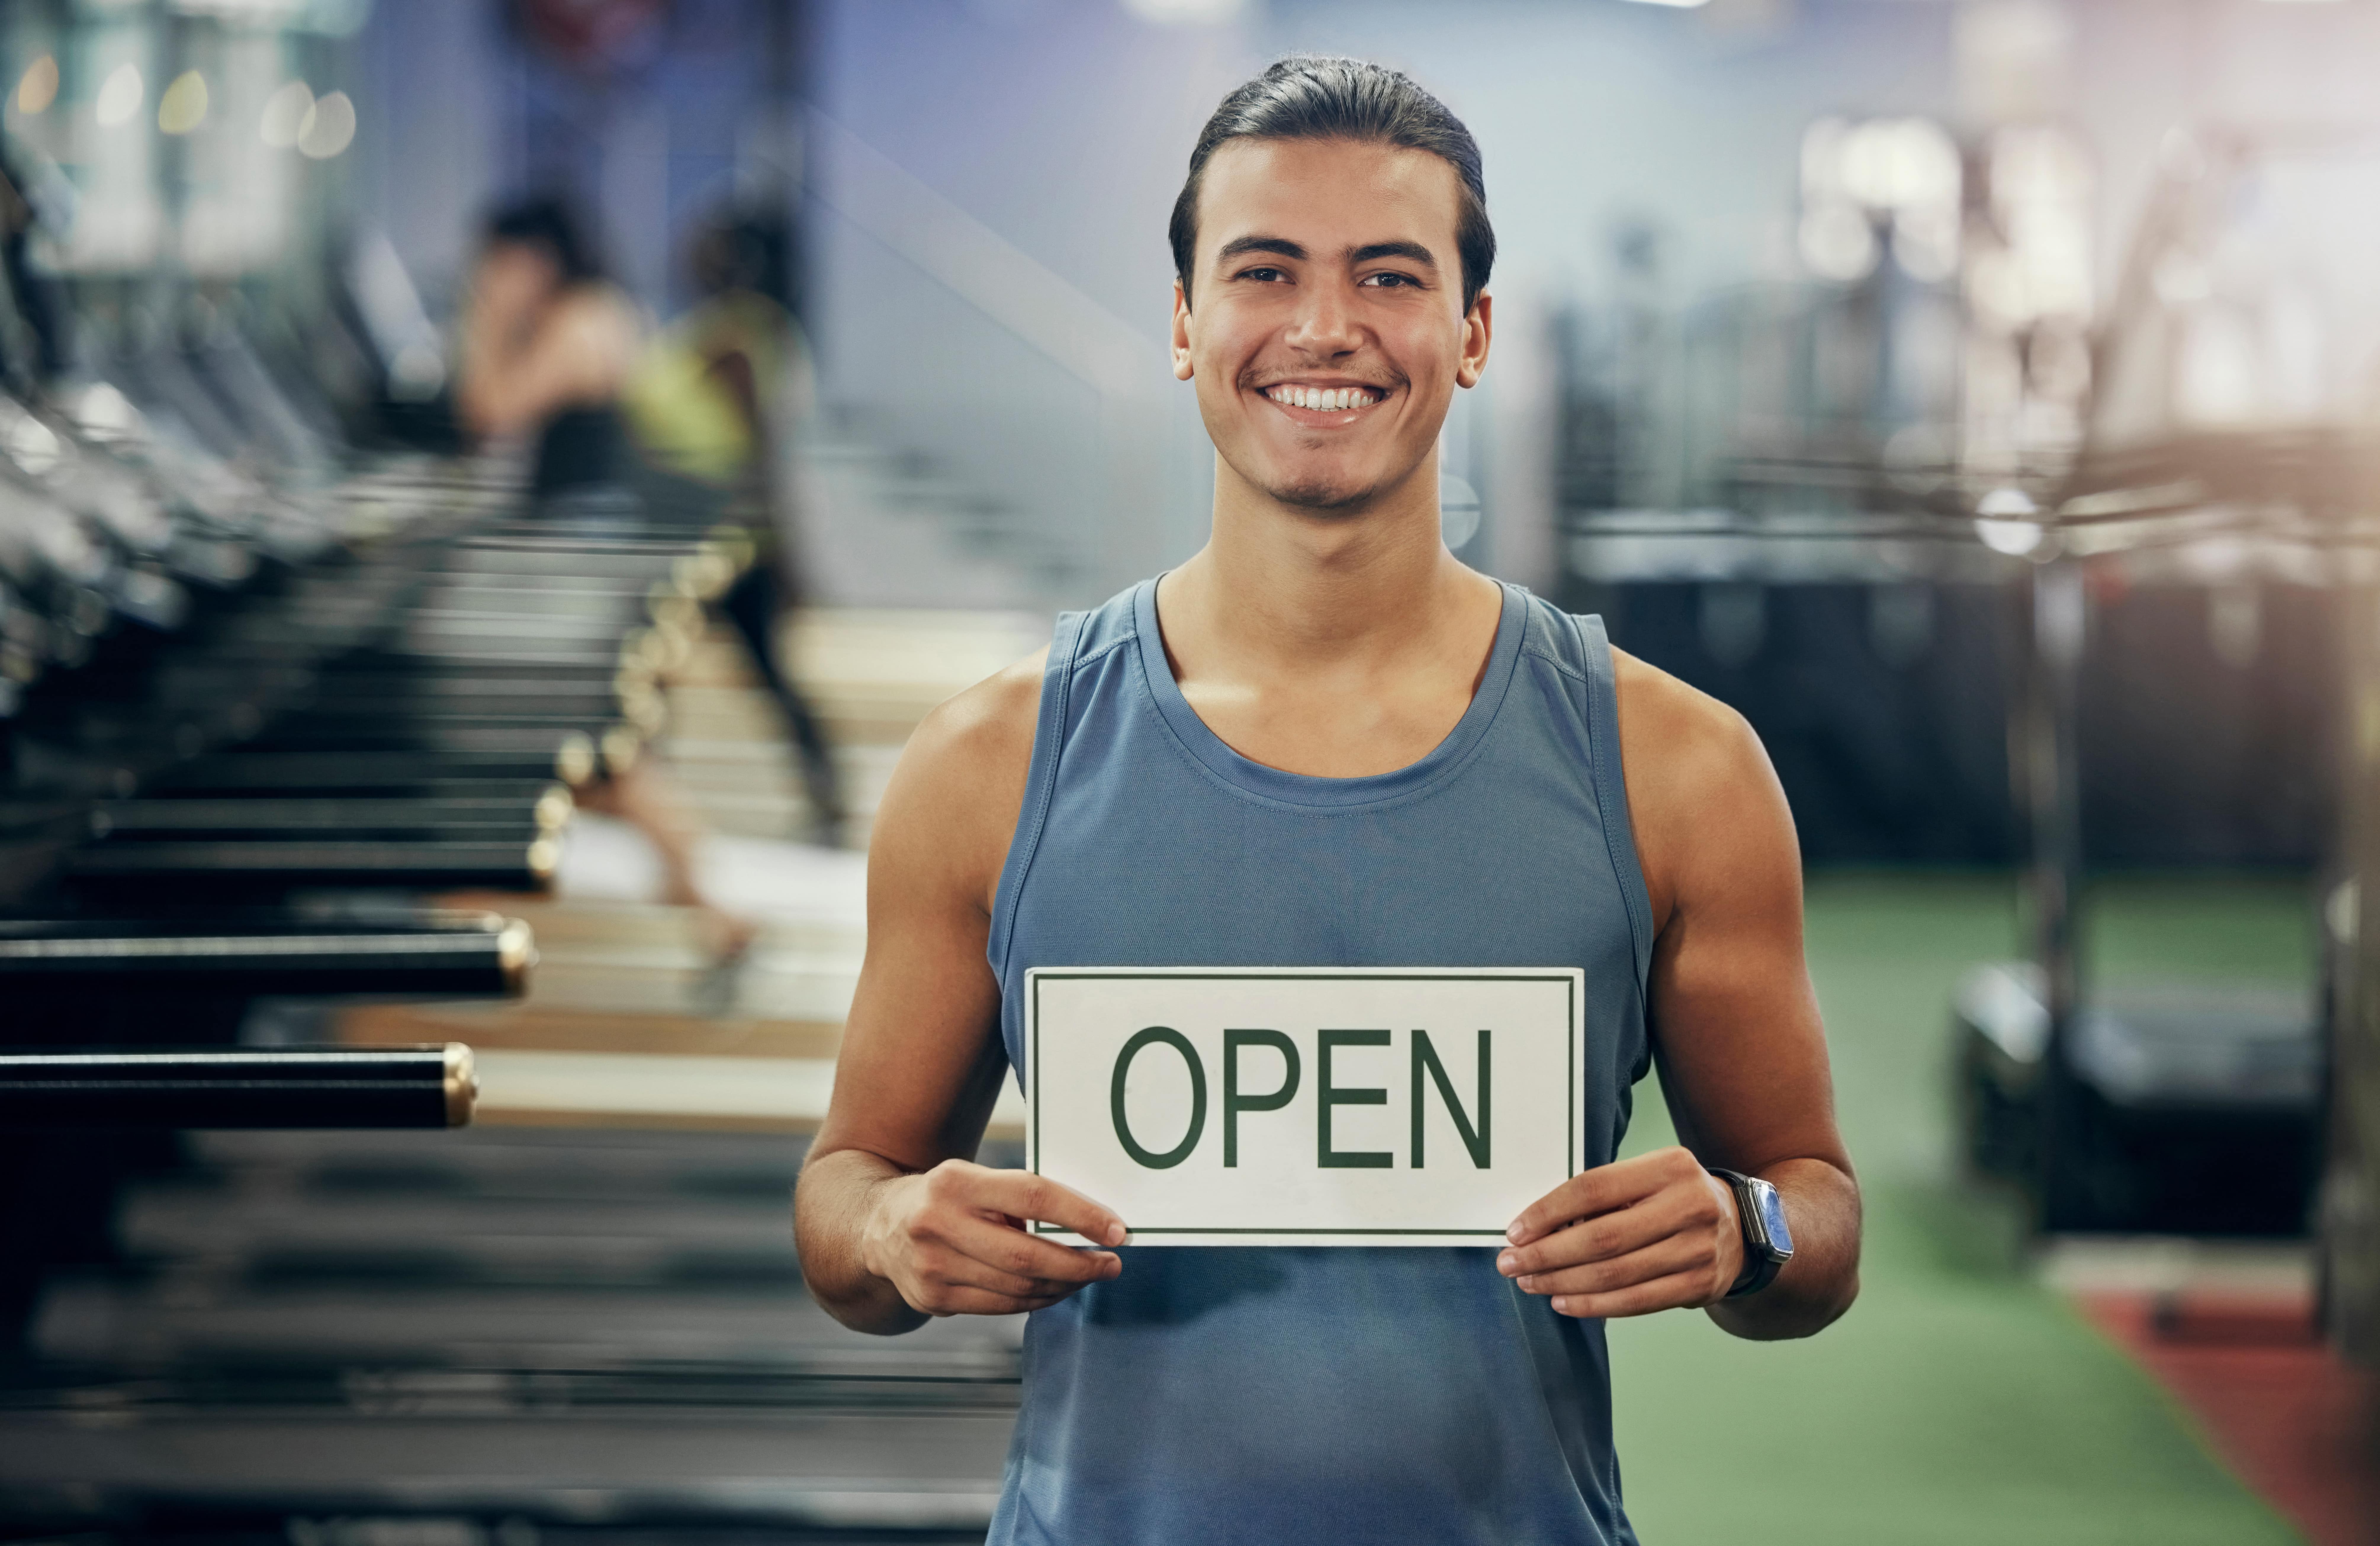 Start Your Fitness Business or Work at a Fitness Club? What is best?